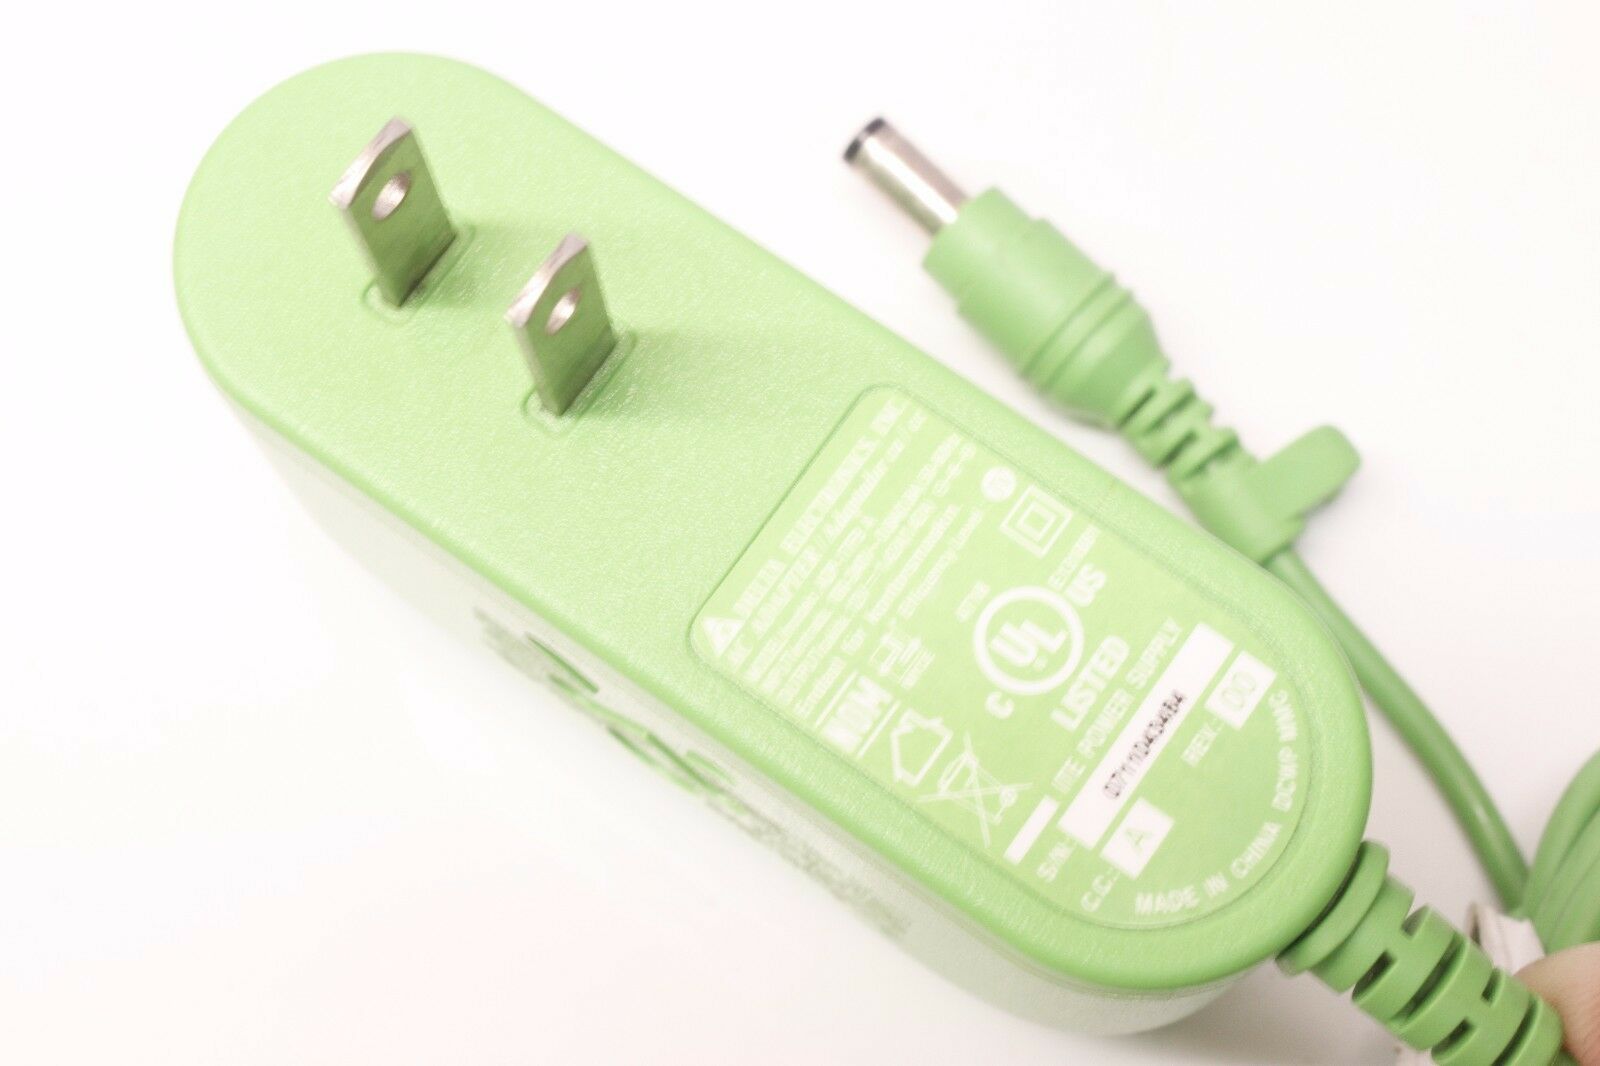 Delta ADP17FB AC DC Power Supply Adapter Charger Output 12V 1.42A Cord Model Number ADP17FB Output: 12V 1.42A one year